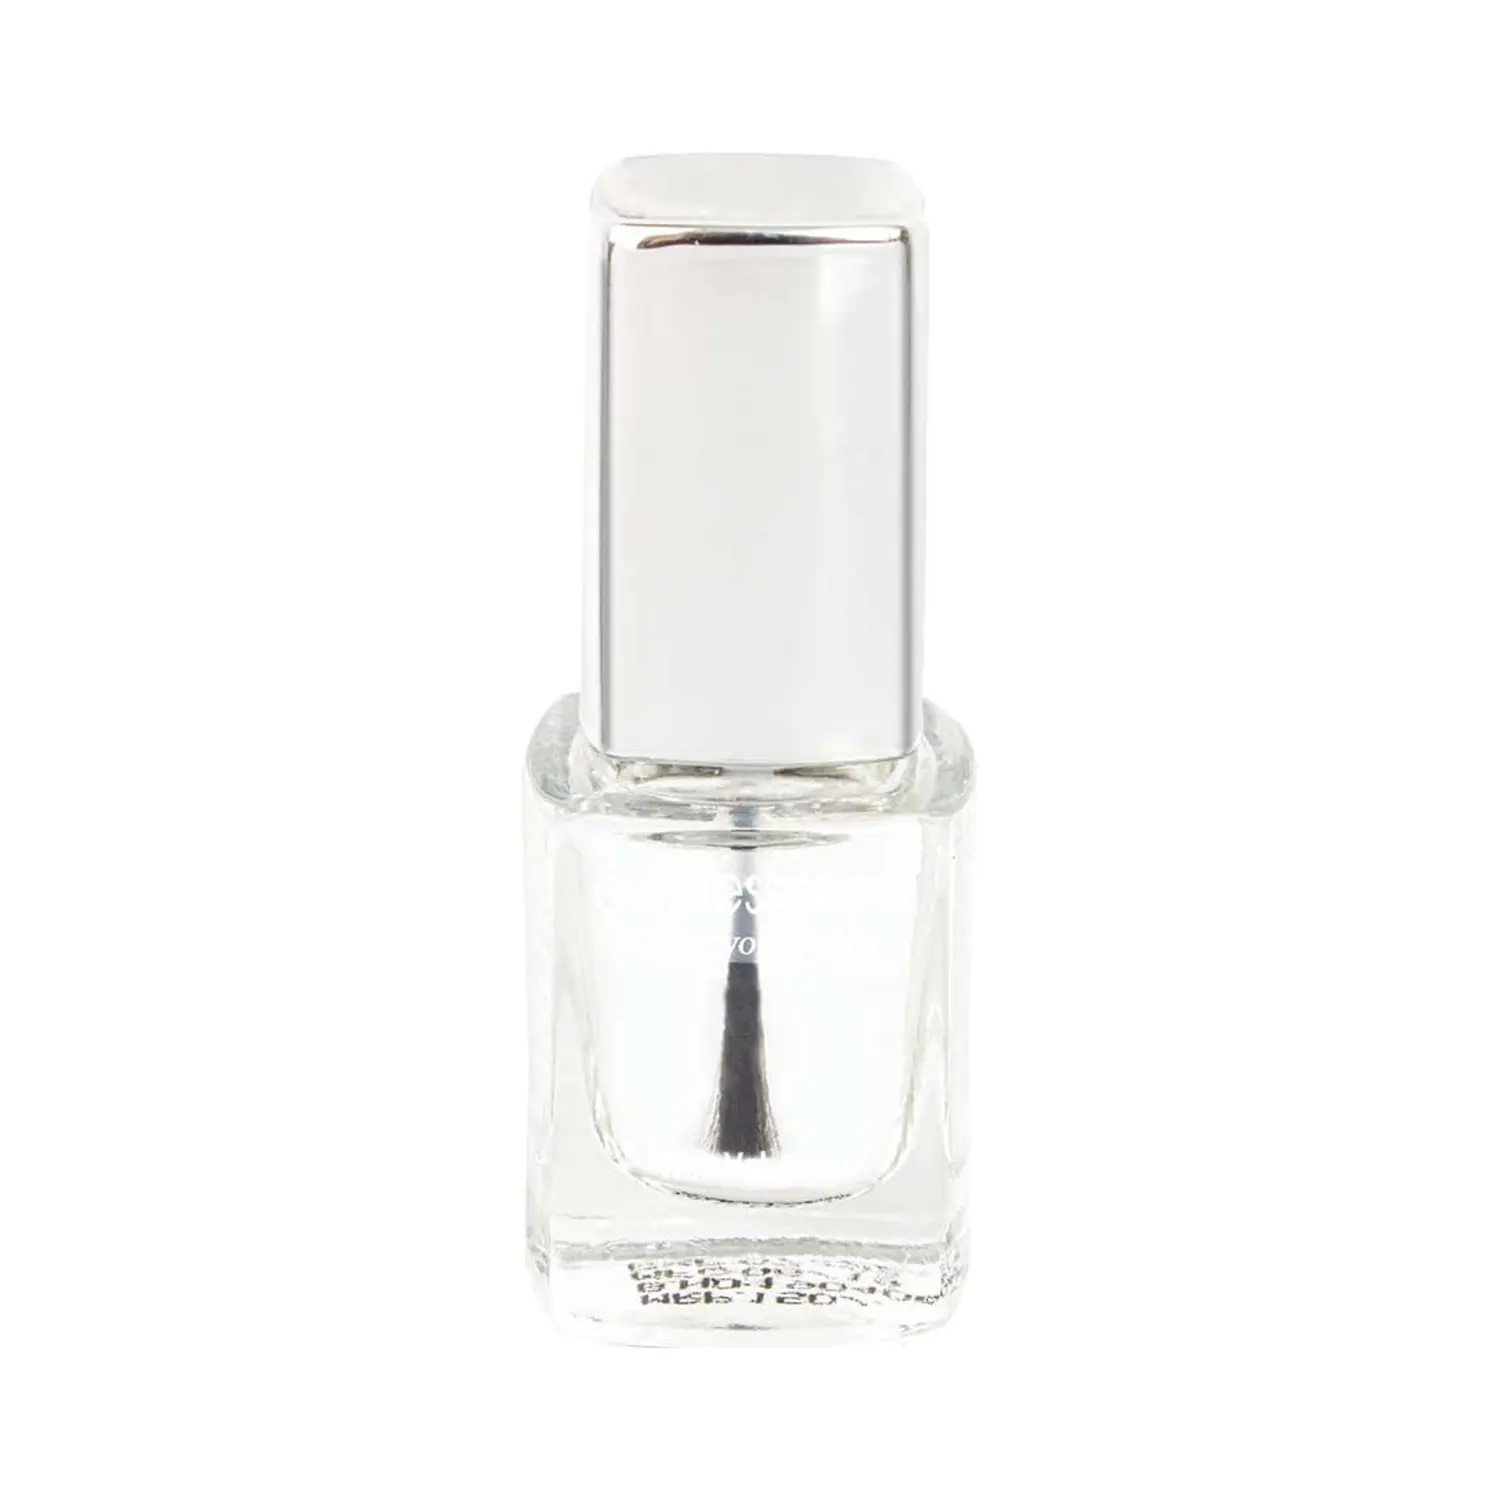 Coloressence | Coloressence Regular Nail Paint - Crystal Look (10ml)